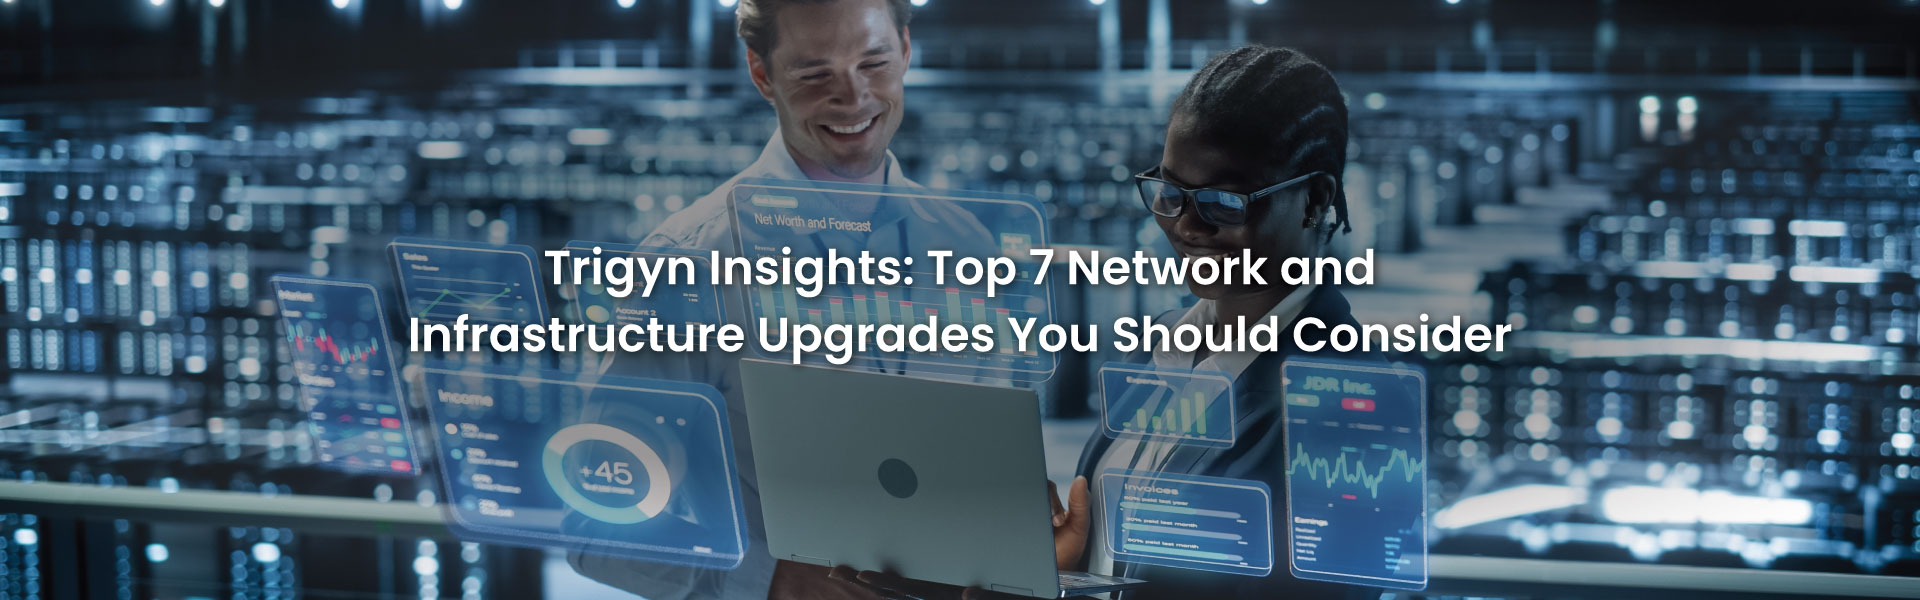 Top 7 Network and Infrastructure Upgrades 